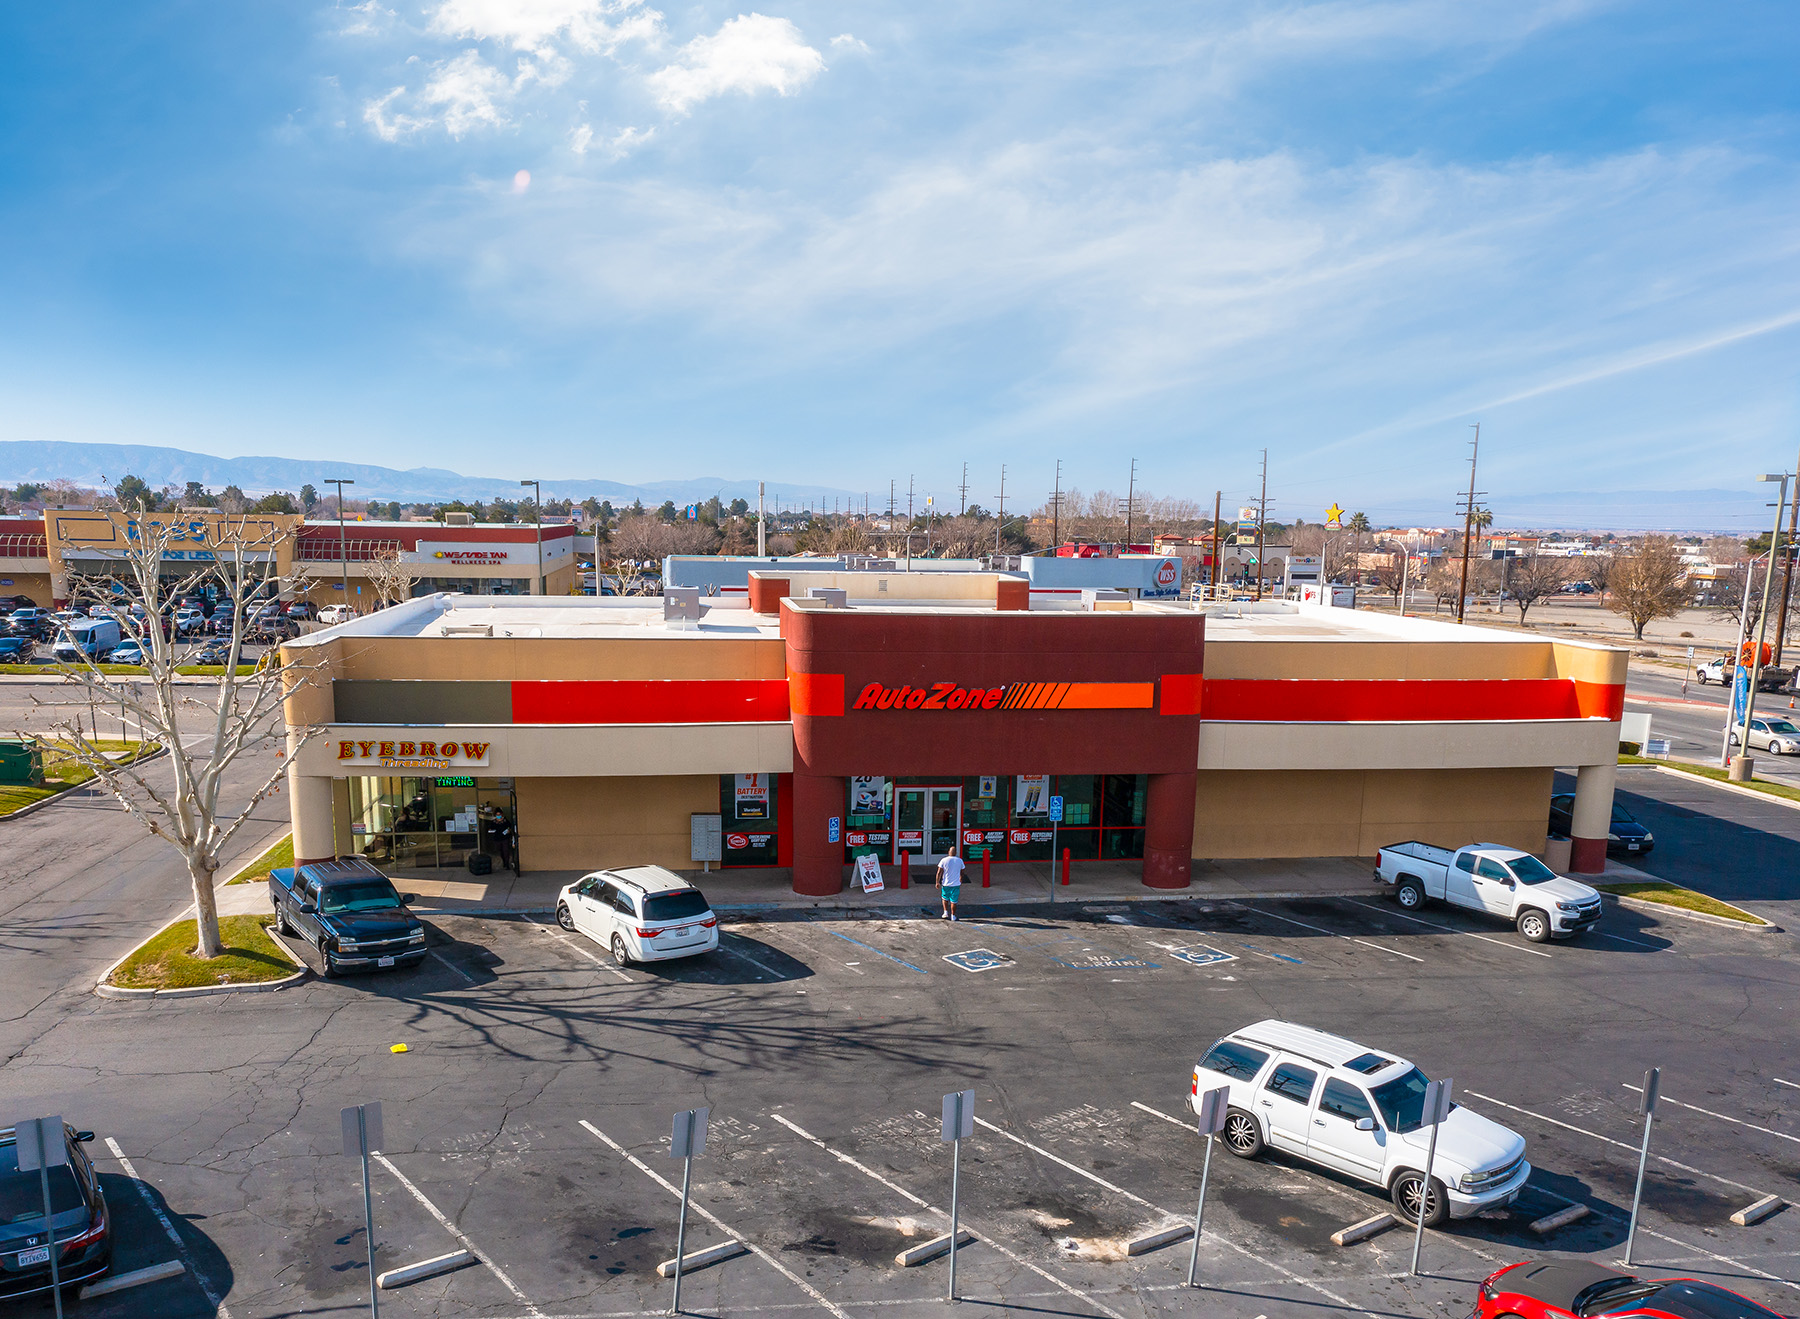 Hanley Investment Group Arranges Sale of AutoZone-Occupied Two-Tenant Pad Building at Target-Anchored Shopping Center in Northern Los Angeles County for $2.65 Million